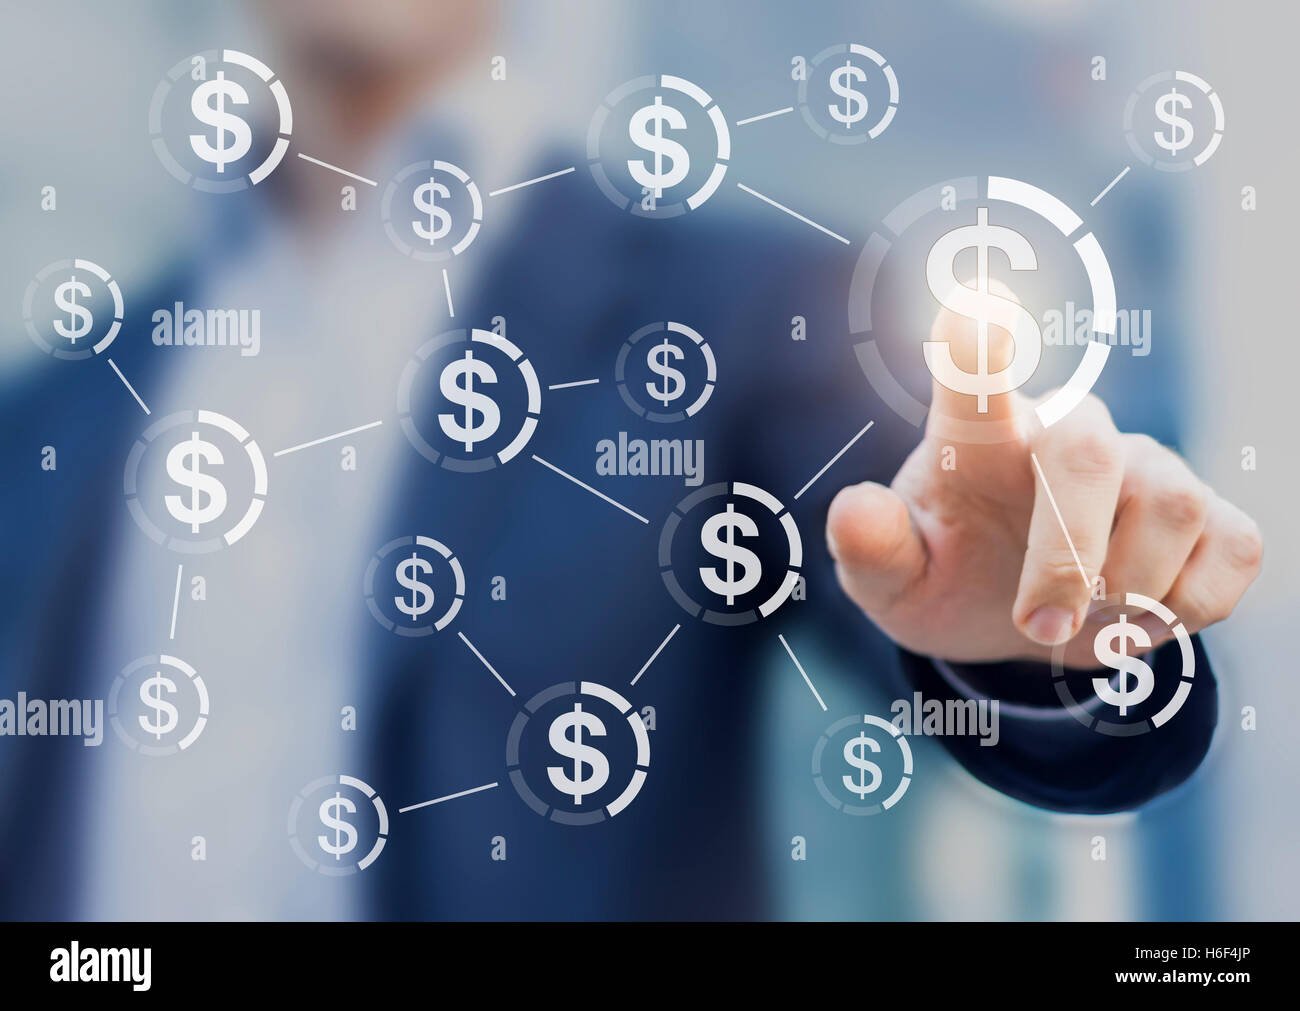 Businessman touching button with dollar currency symbols connected in network, concept about global finance Stock Photo